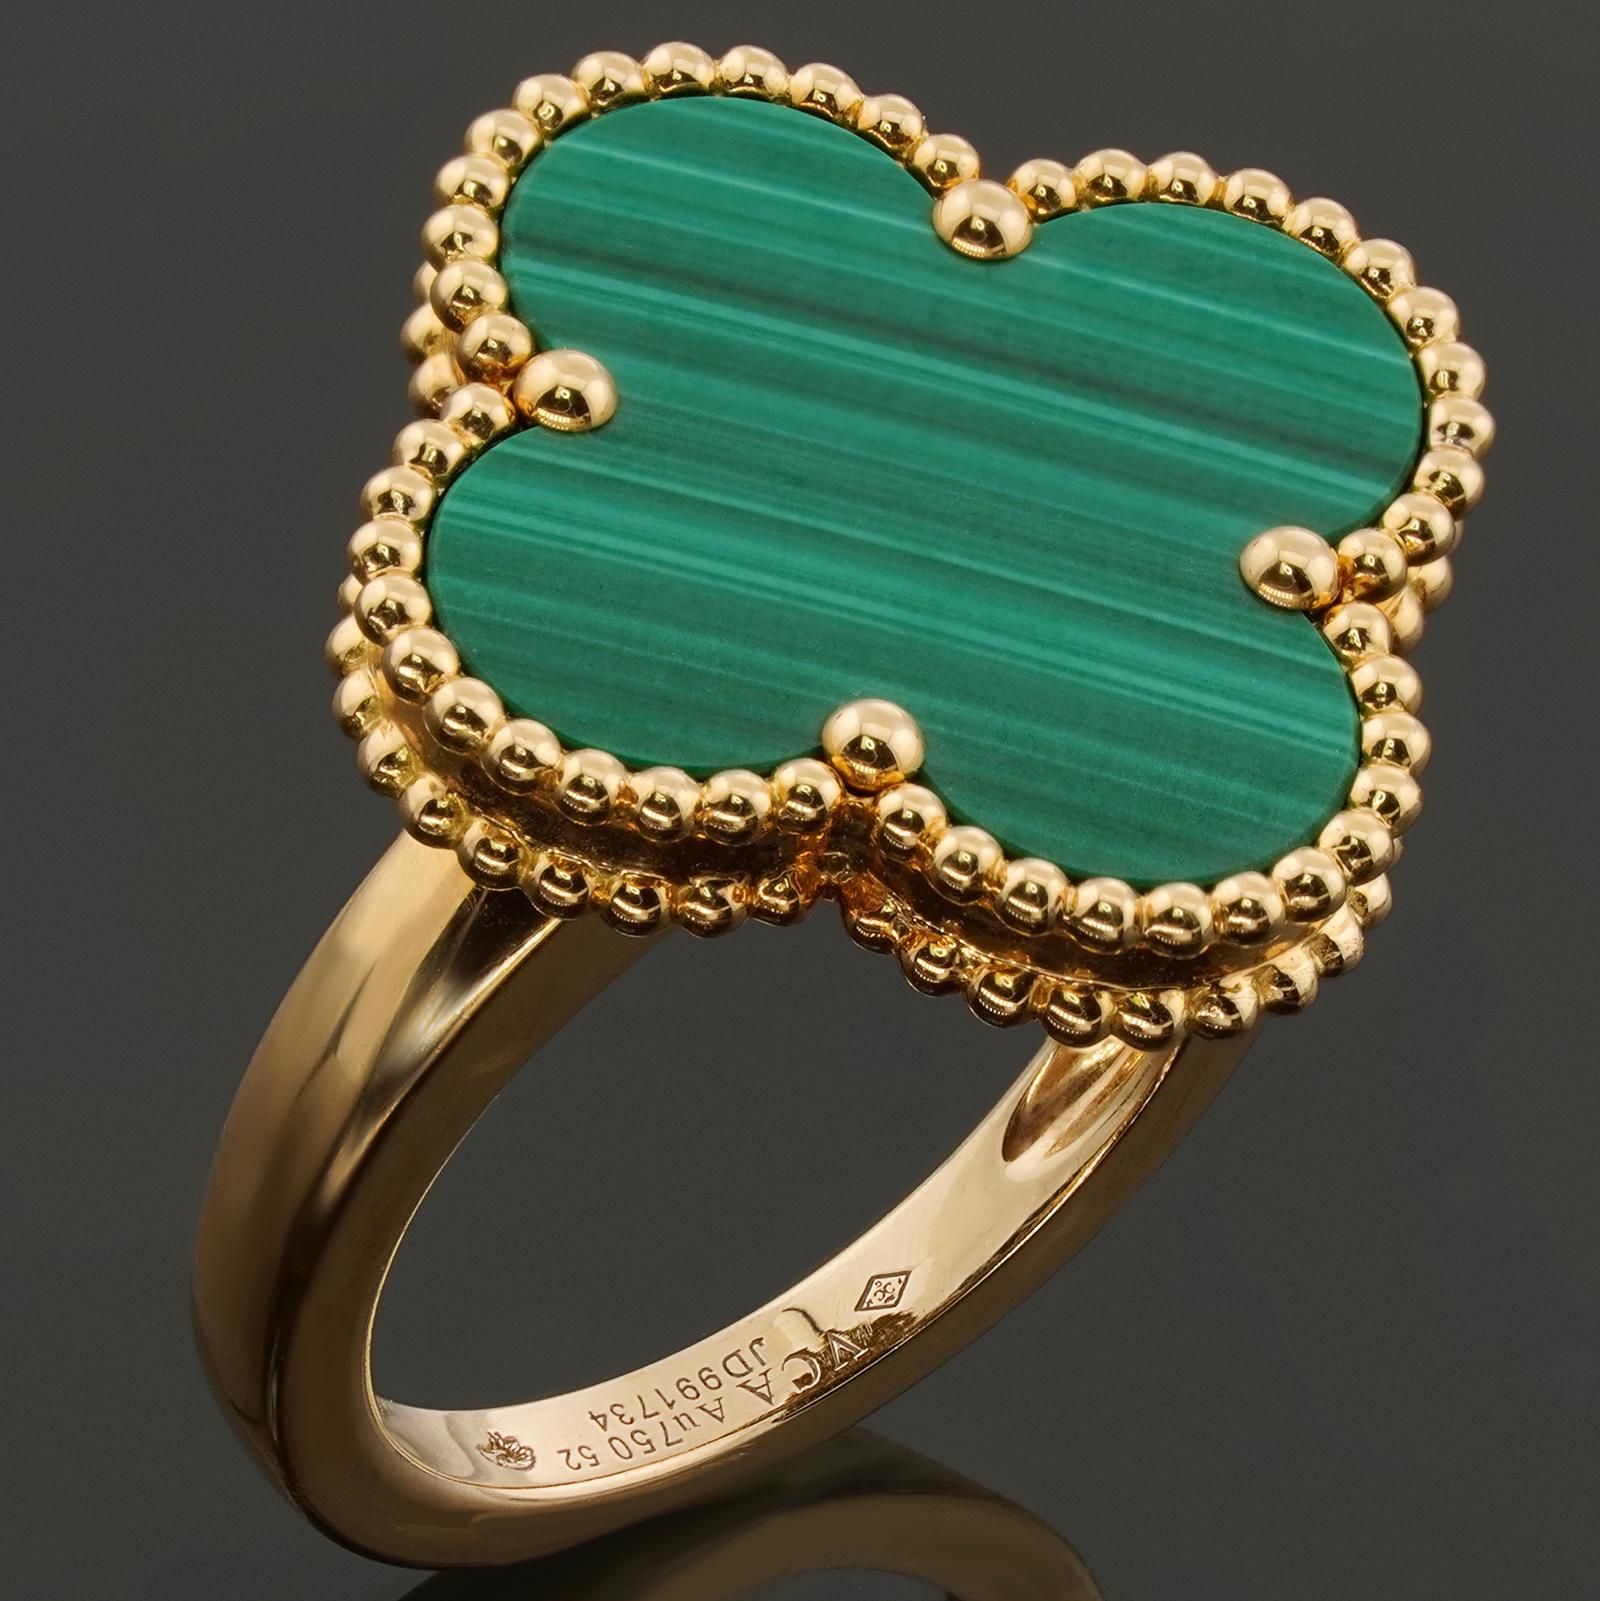 This fabulous Van Cleef & Arpels ring from the iconic Magic Alhambra collection features the classic bead-edged lucky clover design crafted in 18k yellow gold and inlaid with green malachite. Made in France circa 2020s. Measurements: 0.78